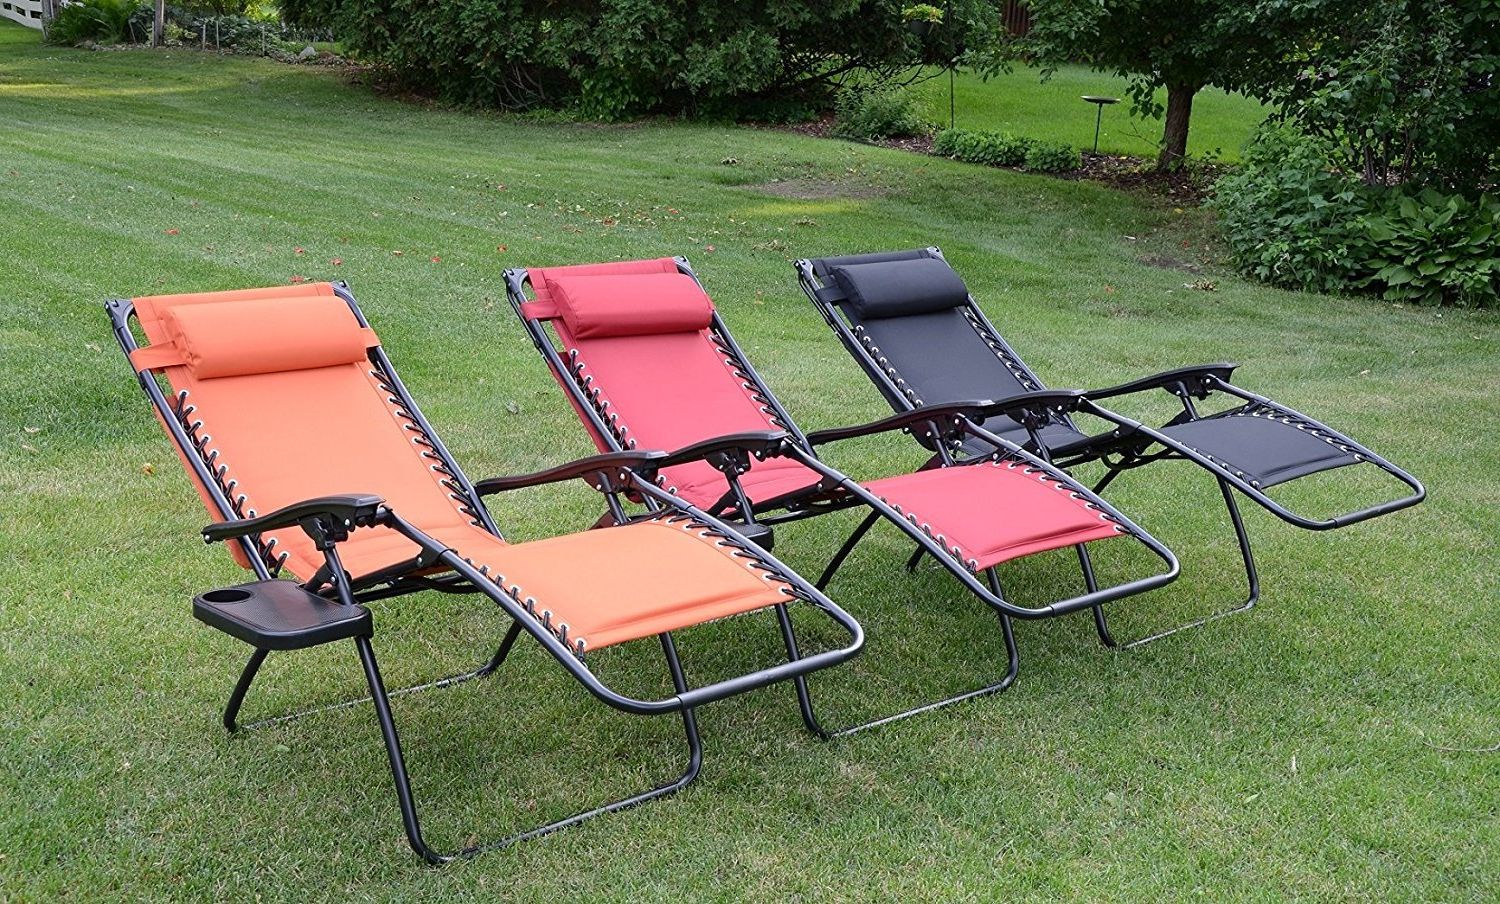 Deluxe Padded Zero Gravity Chair With Canopy + Tray – Sweet Tangerine With Regard To Popular Deluxe Padded Chairs With Canopy And Tray (View 7 of 25)